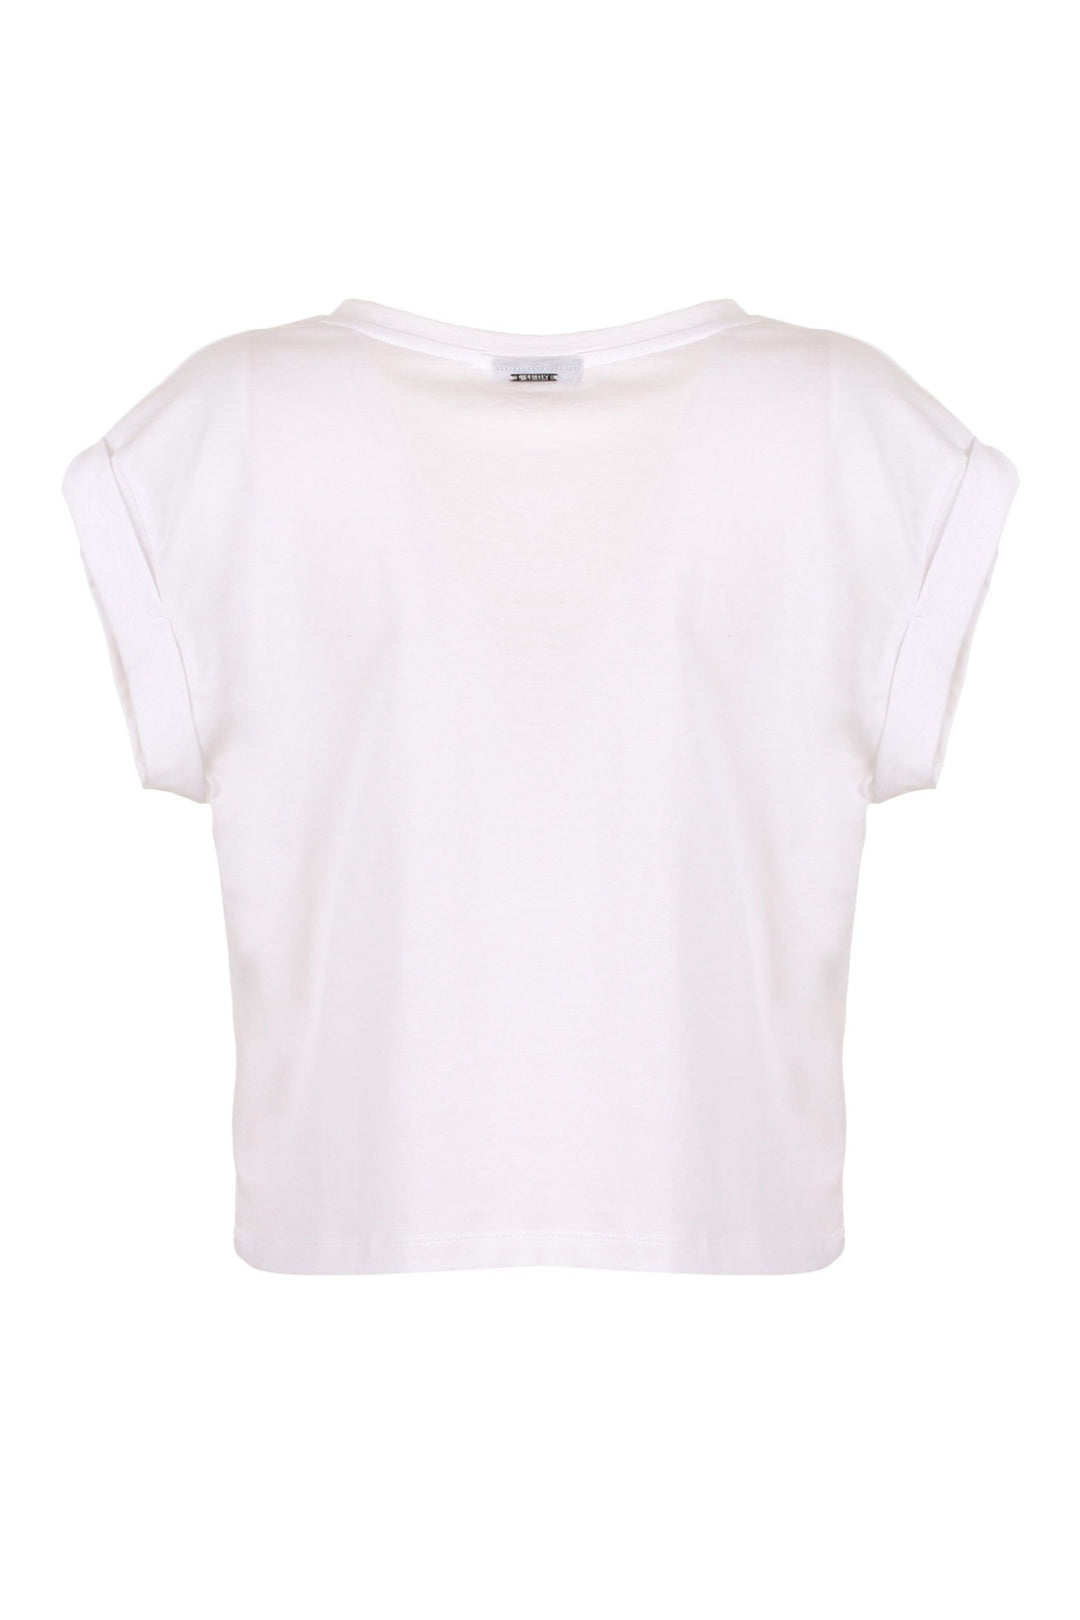 Imperfect White Cotton T-Shirt & Top